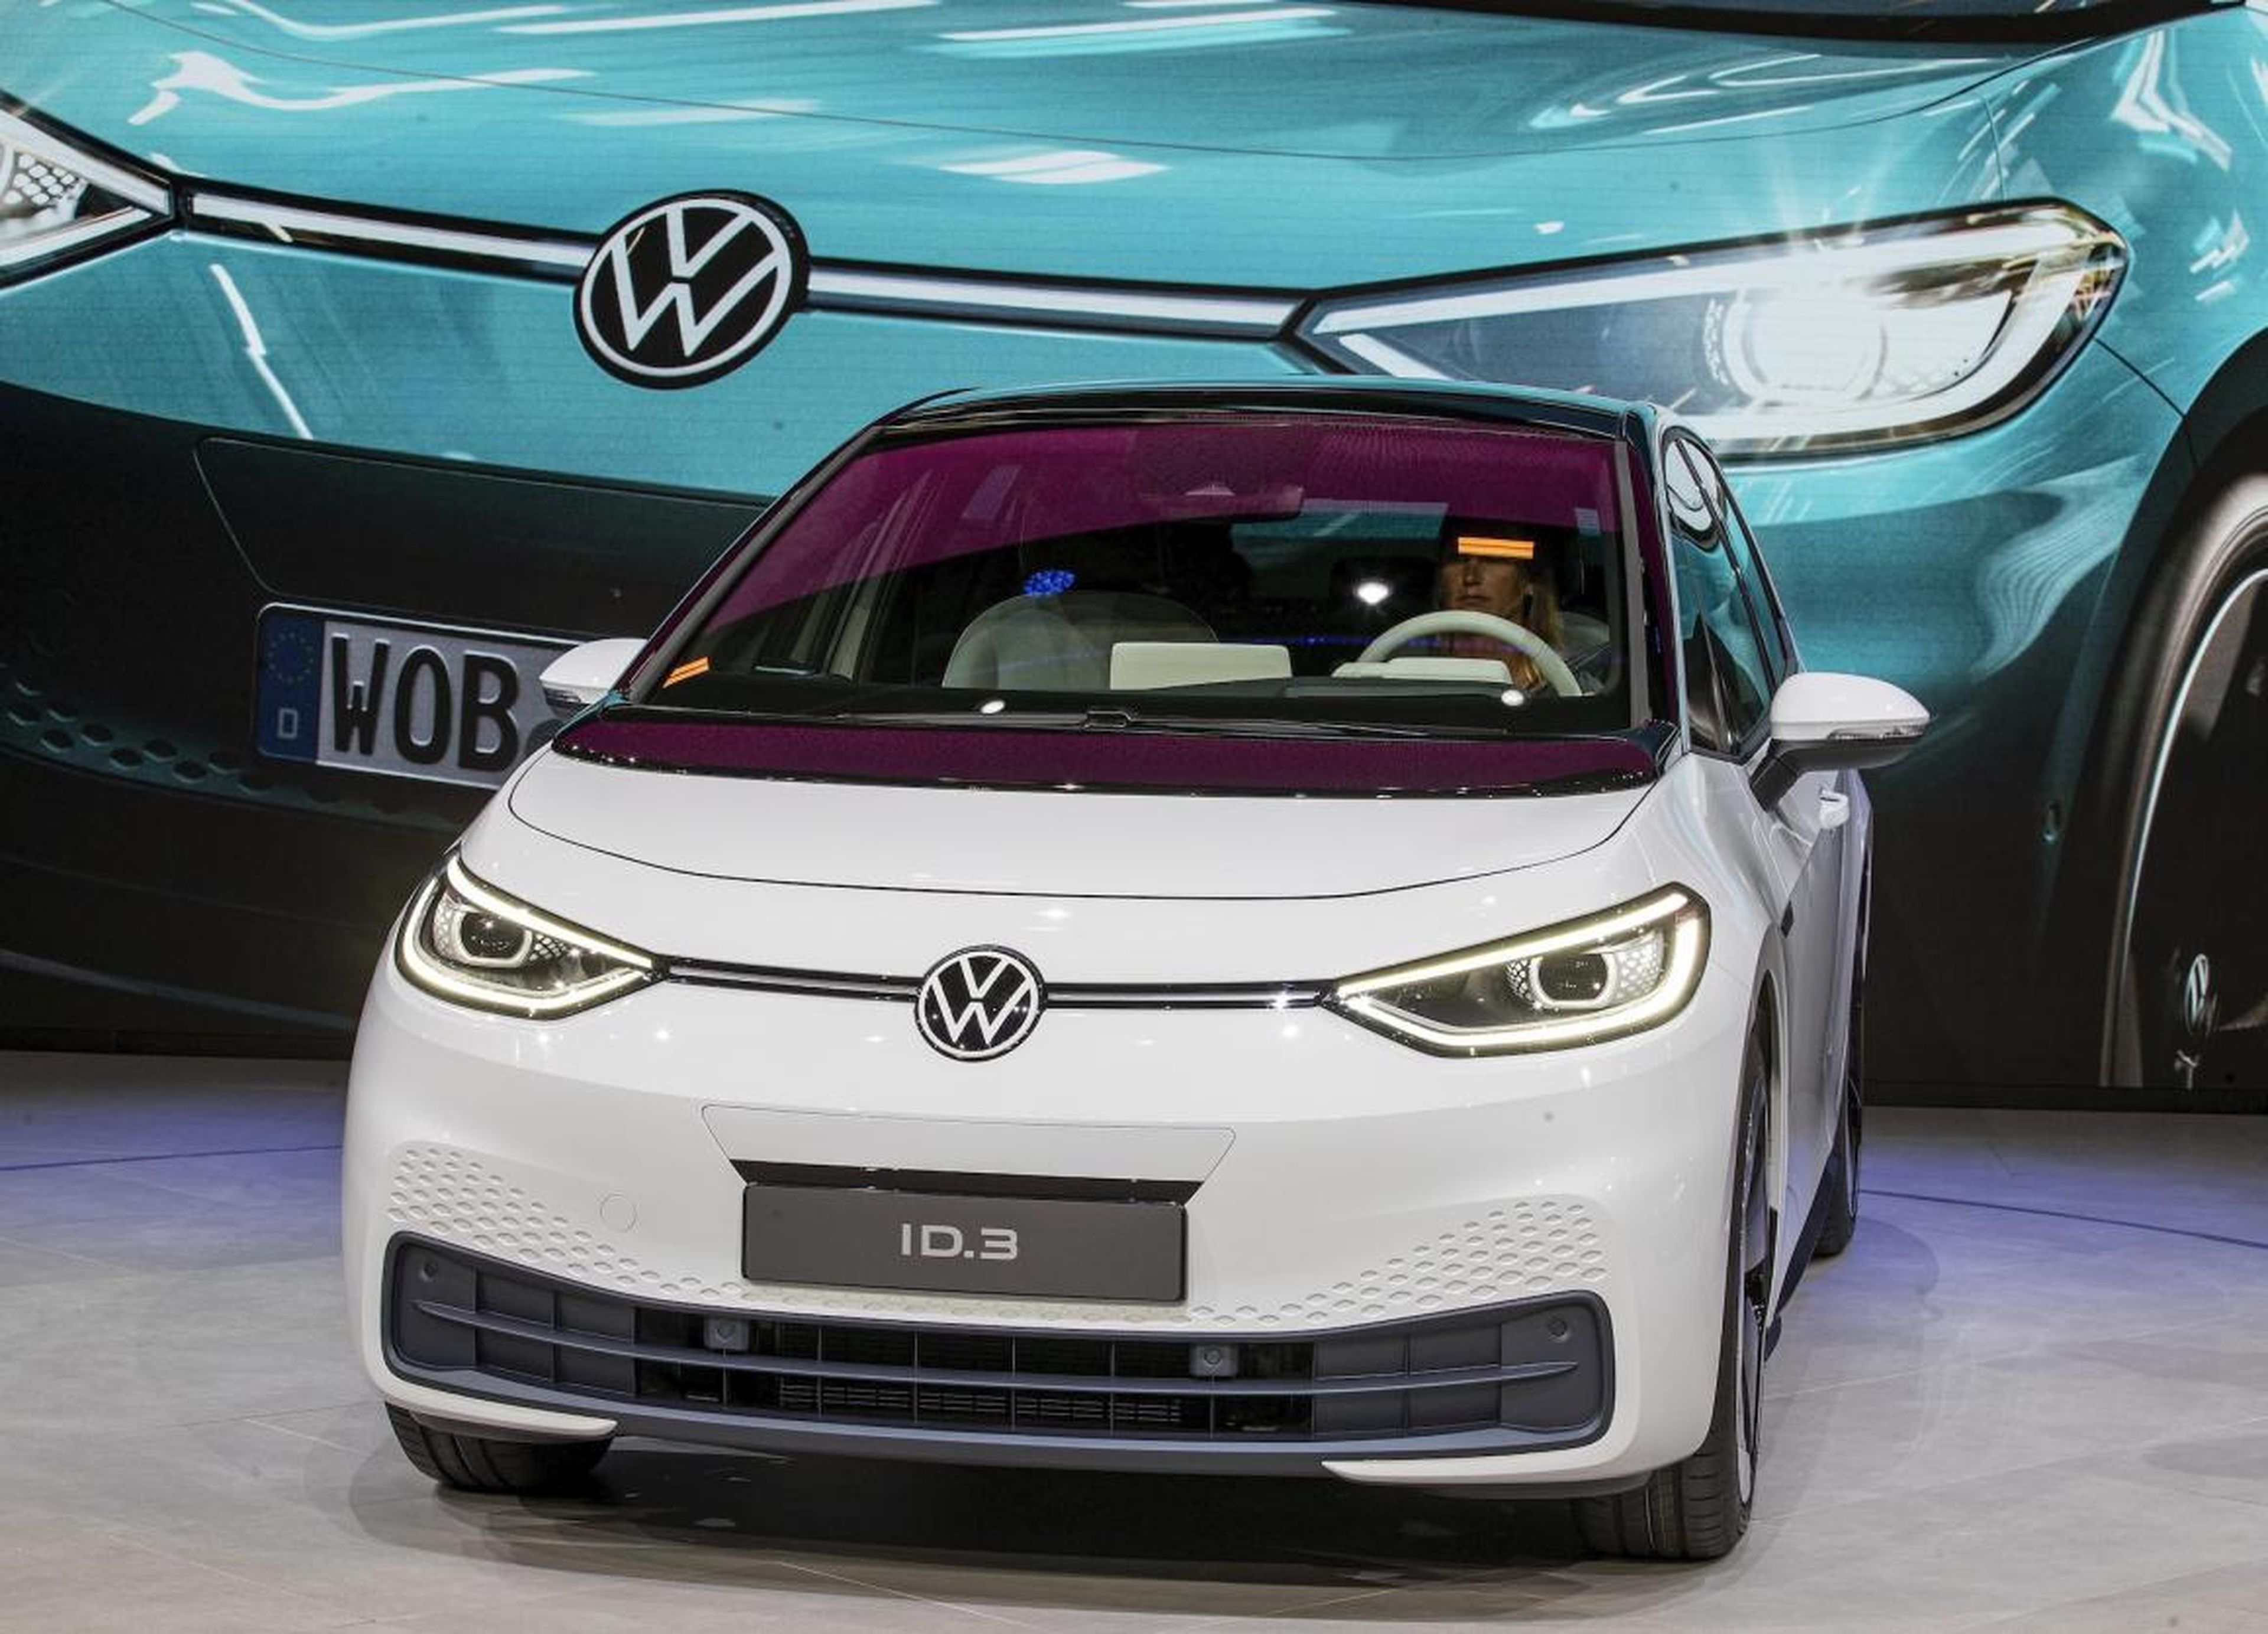 Volkswagen was proud to show its new ID.3, calling it an electric-car for the masses.